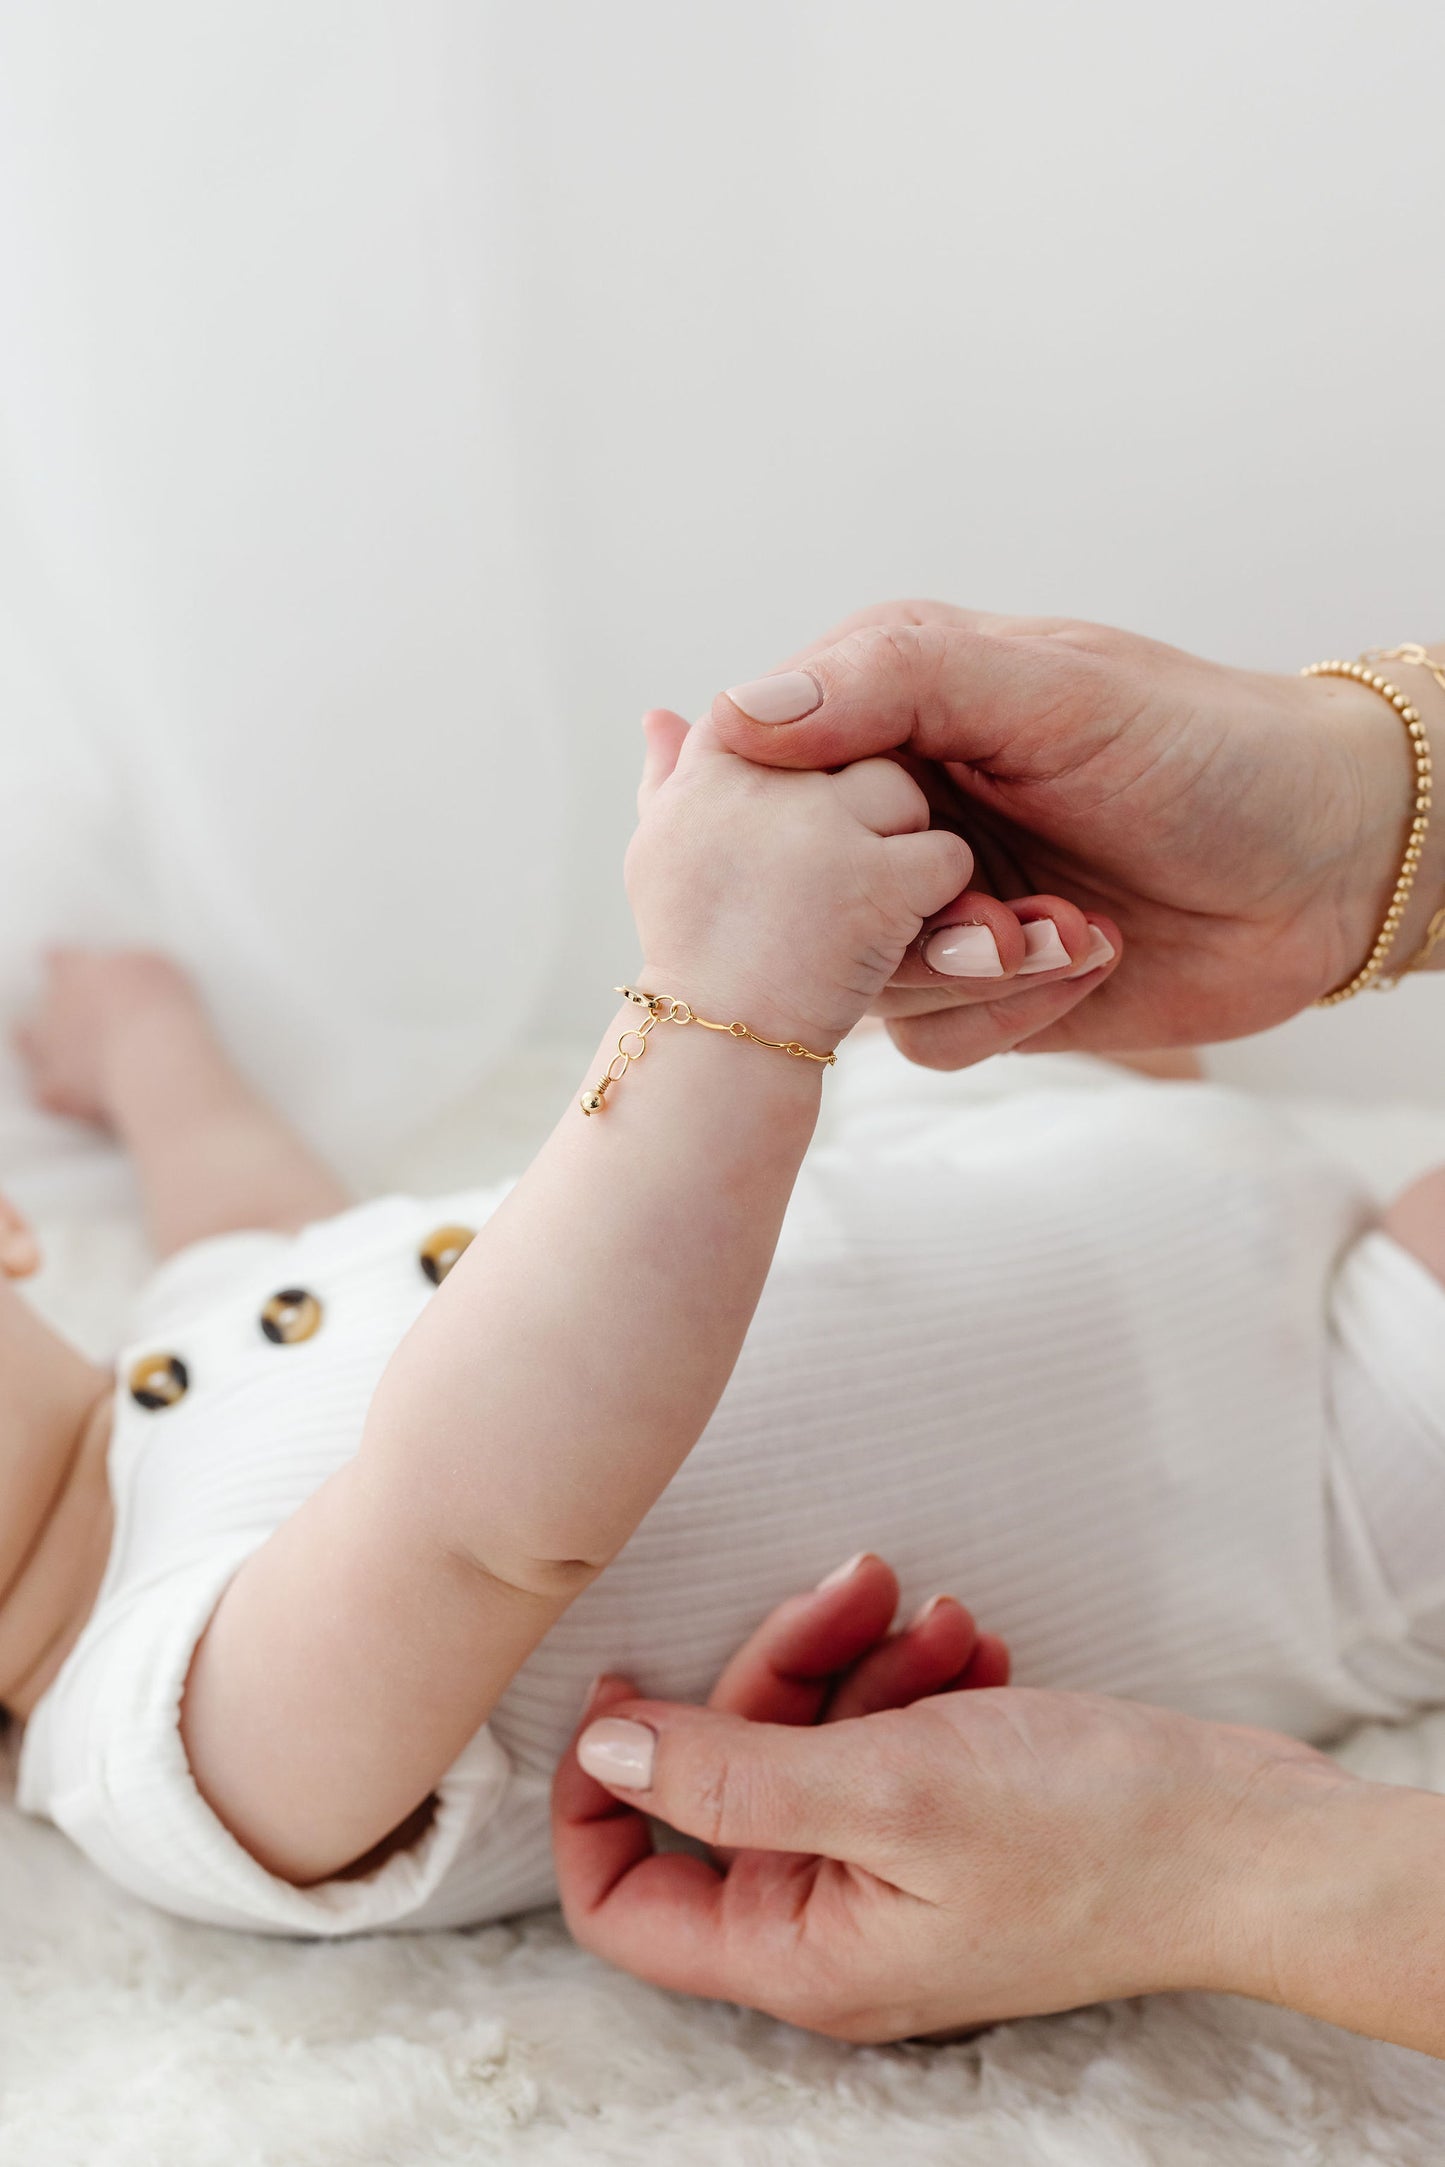 What are The Common Types of Baby Bracelets?